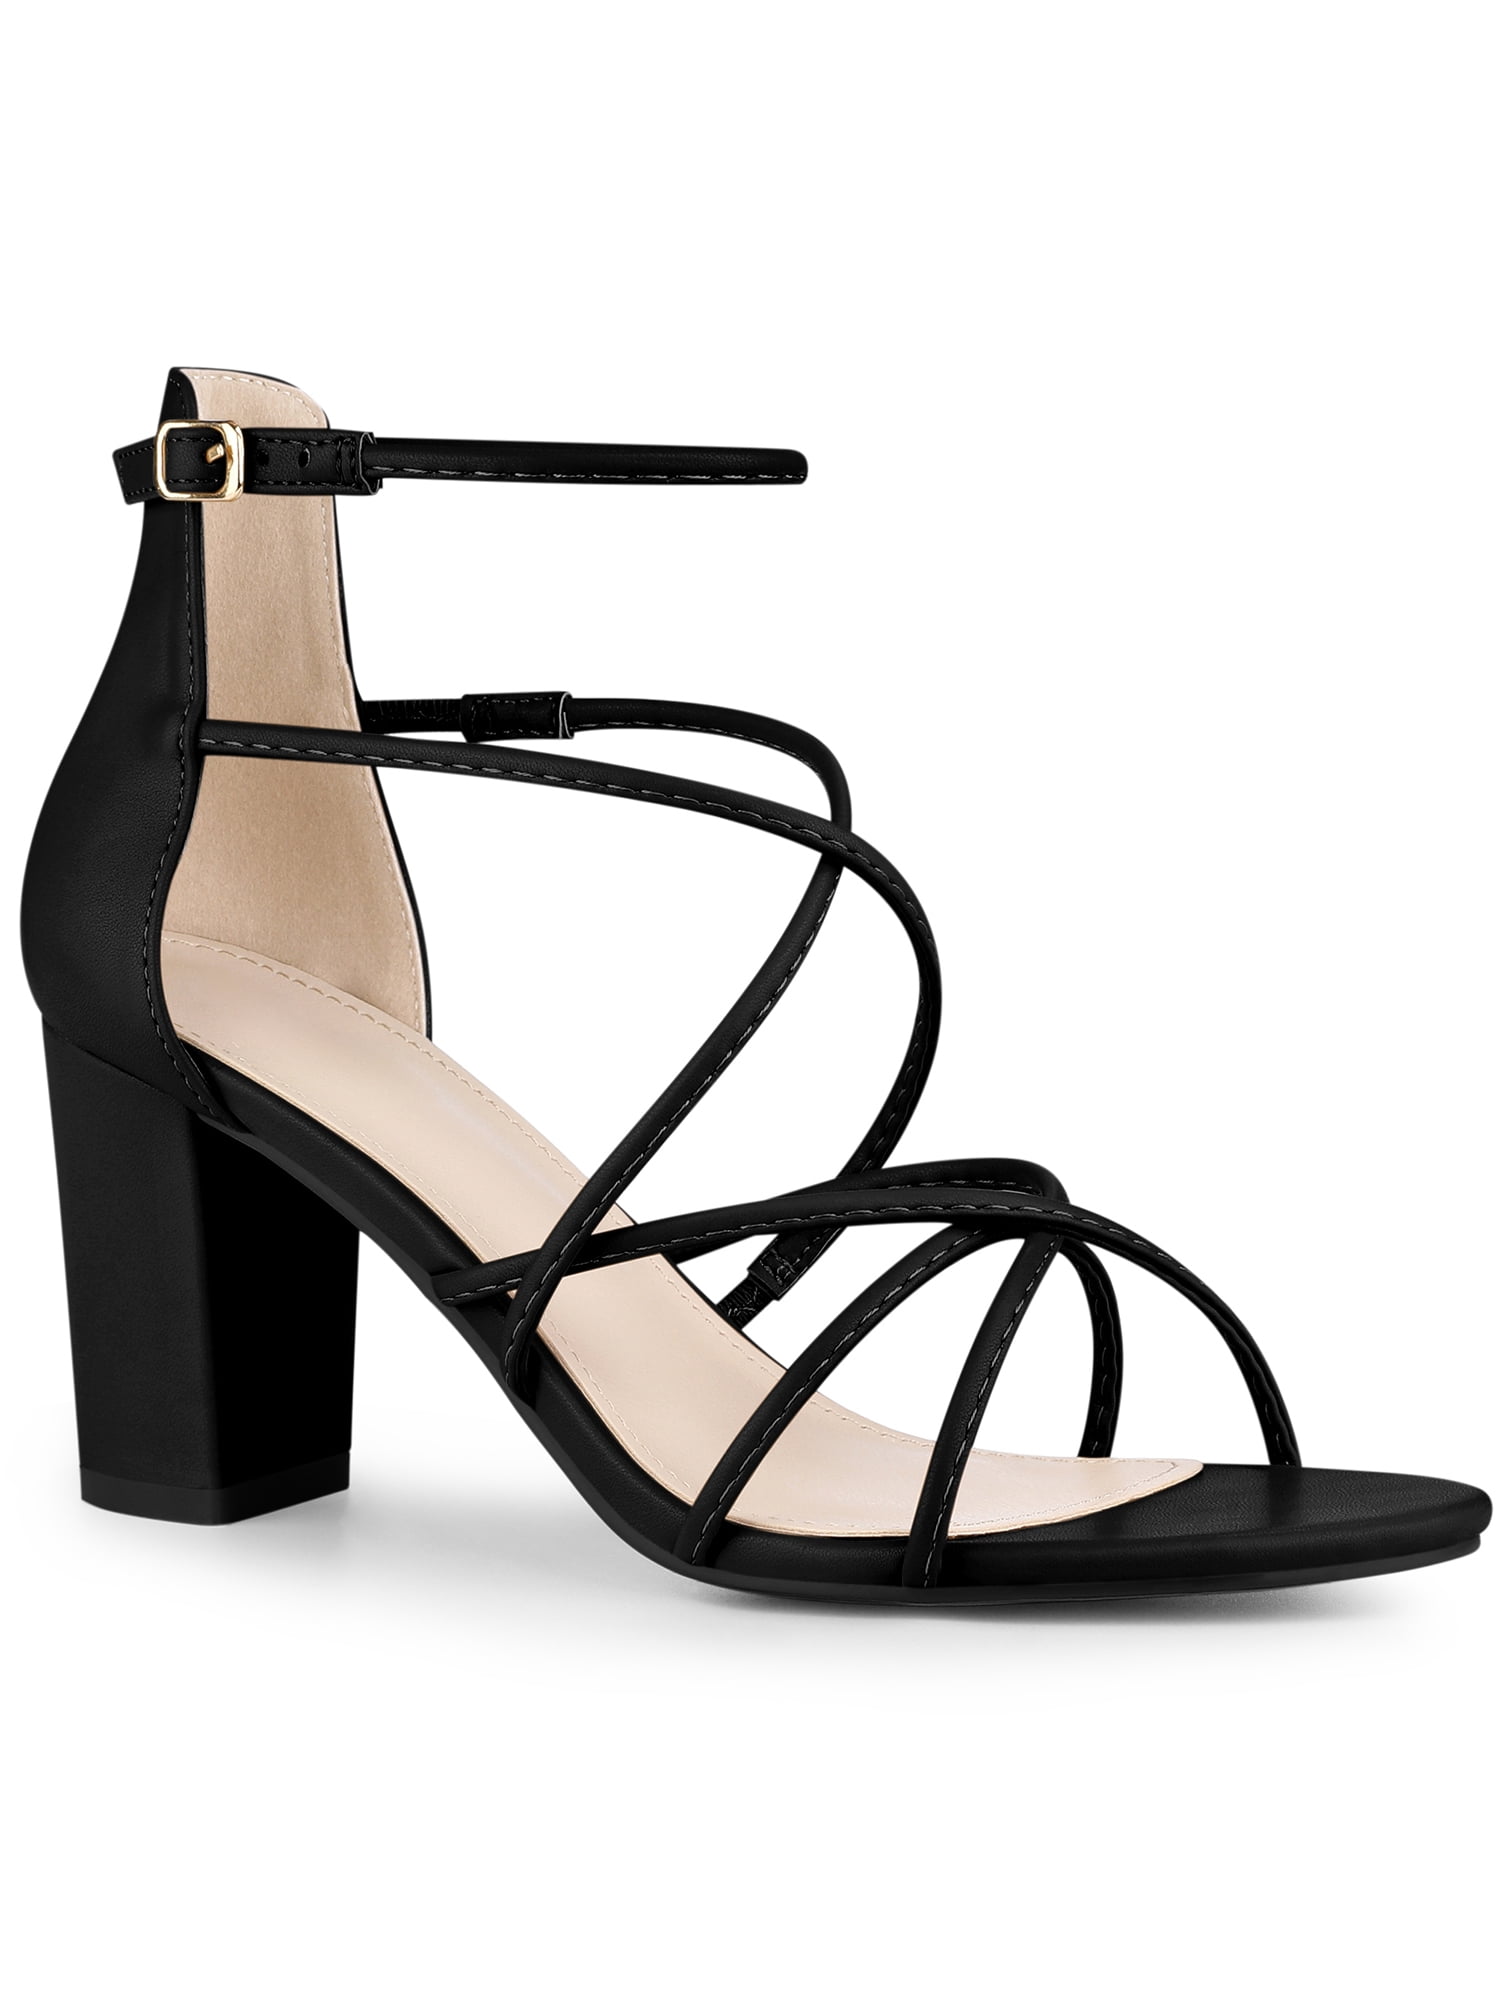 Perphy Crisscross Strappy Strap Chunky Heel Sandals for Women cb512e21 e34b 43ca 8a49 b0fb267f8458.8a27f5767ae21fff38265e23ad87f117